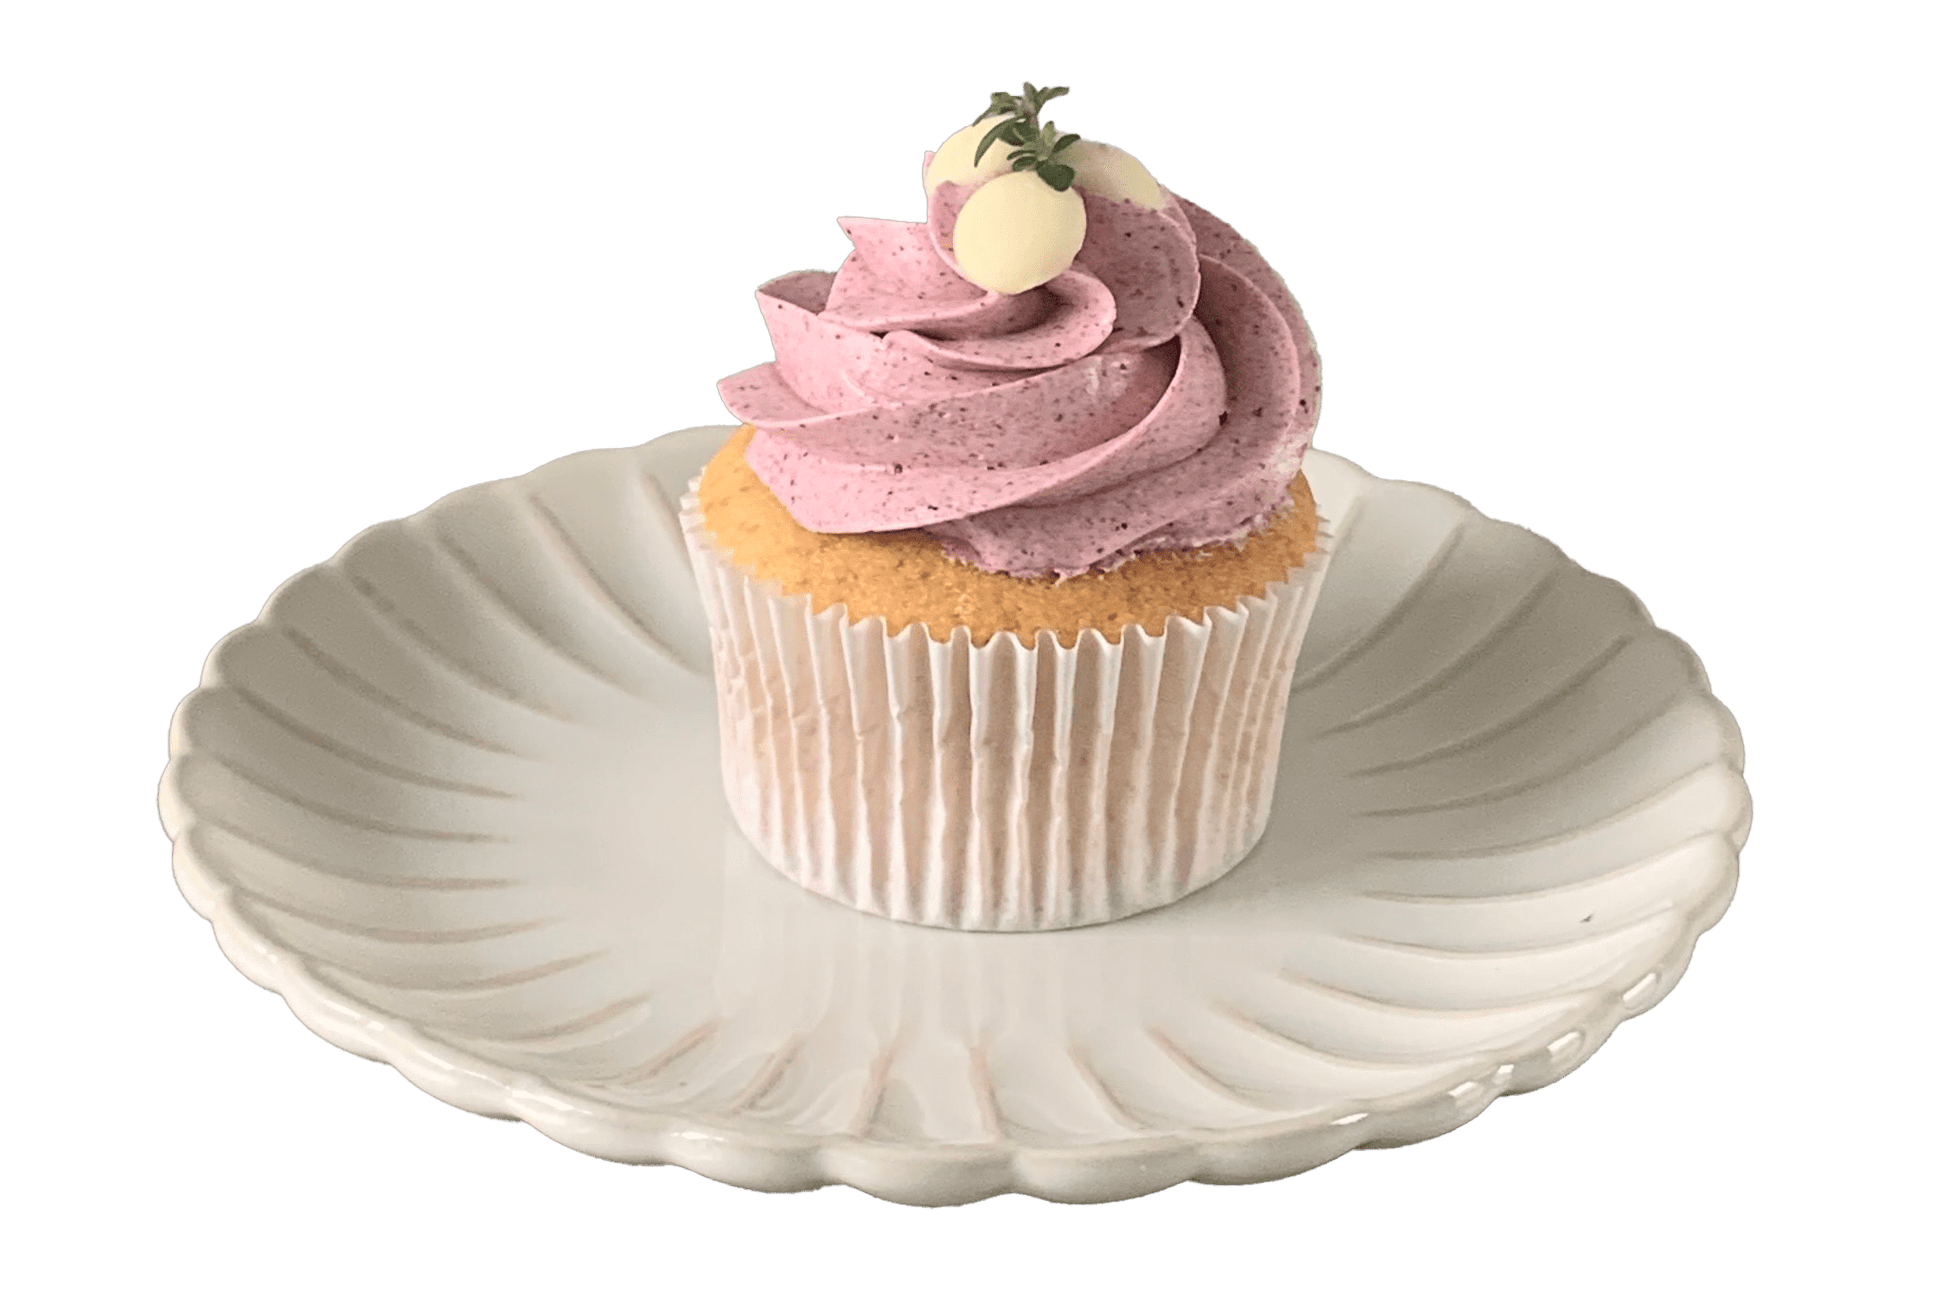 Placed on a white vintage style plate is a vanilla sponge cupcake topped with freeze dried Boysenberry in a Swiss meringue buttercream. Garnished with Belgian white chocolate drops.